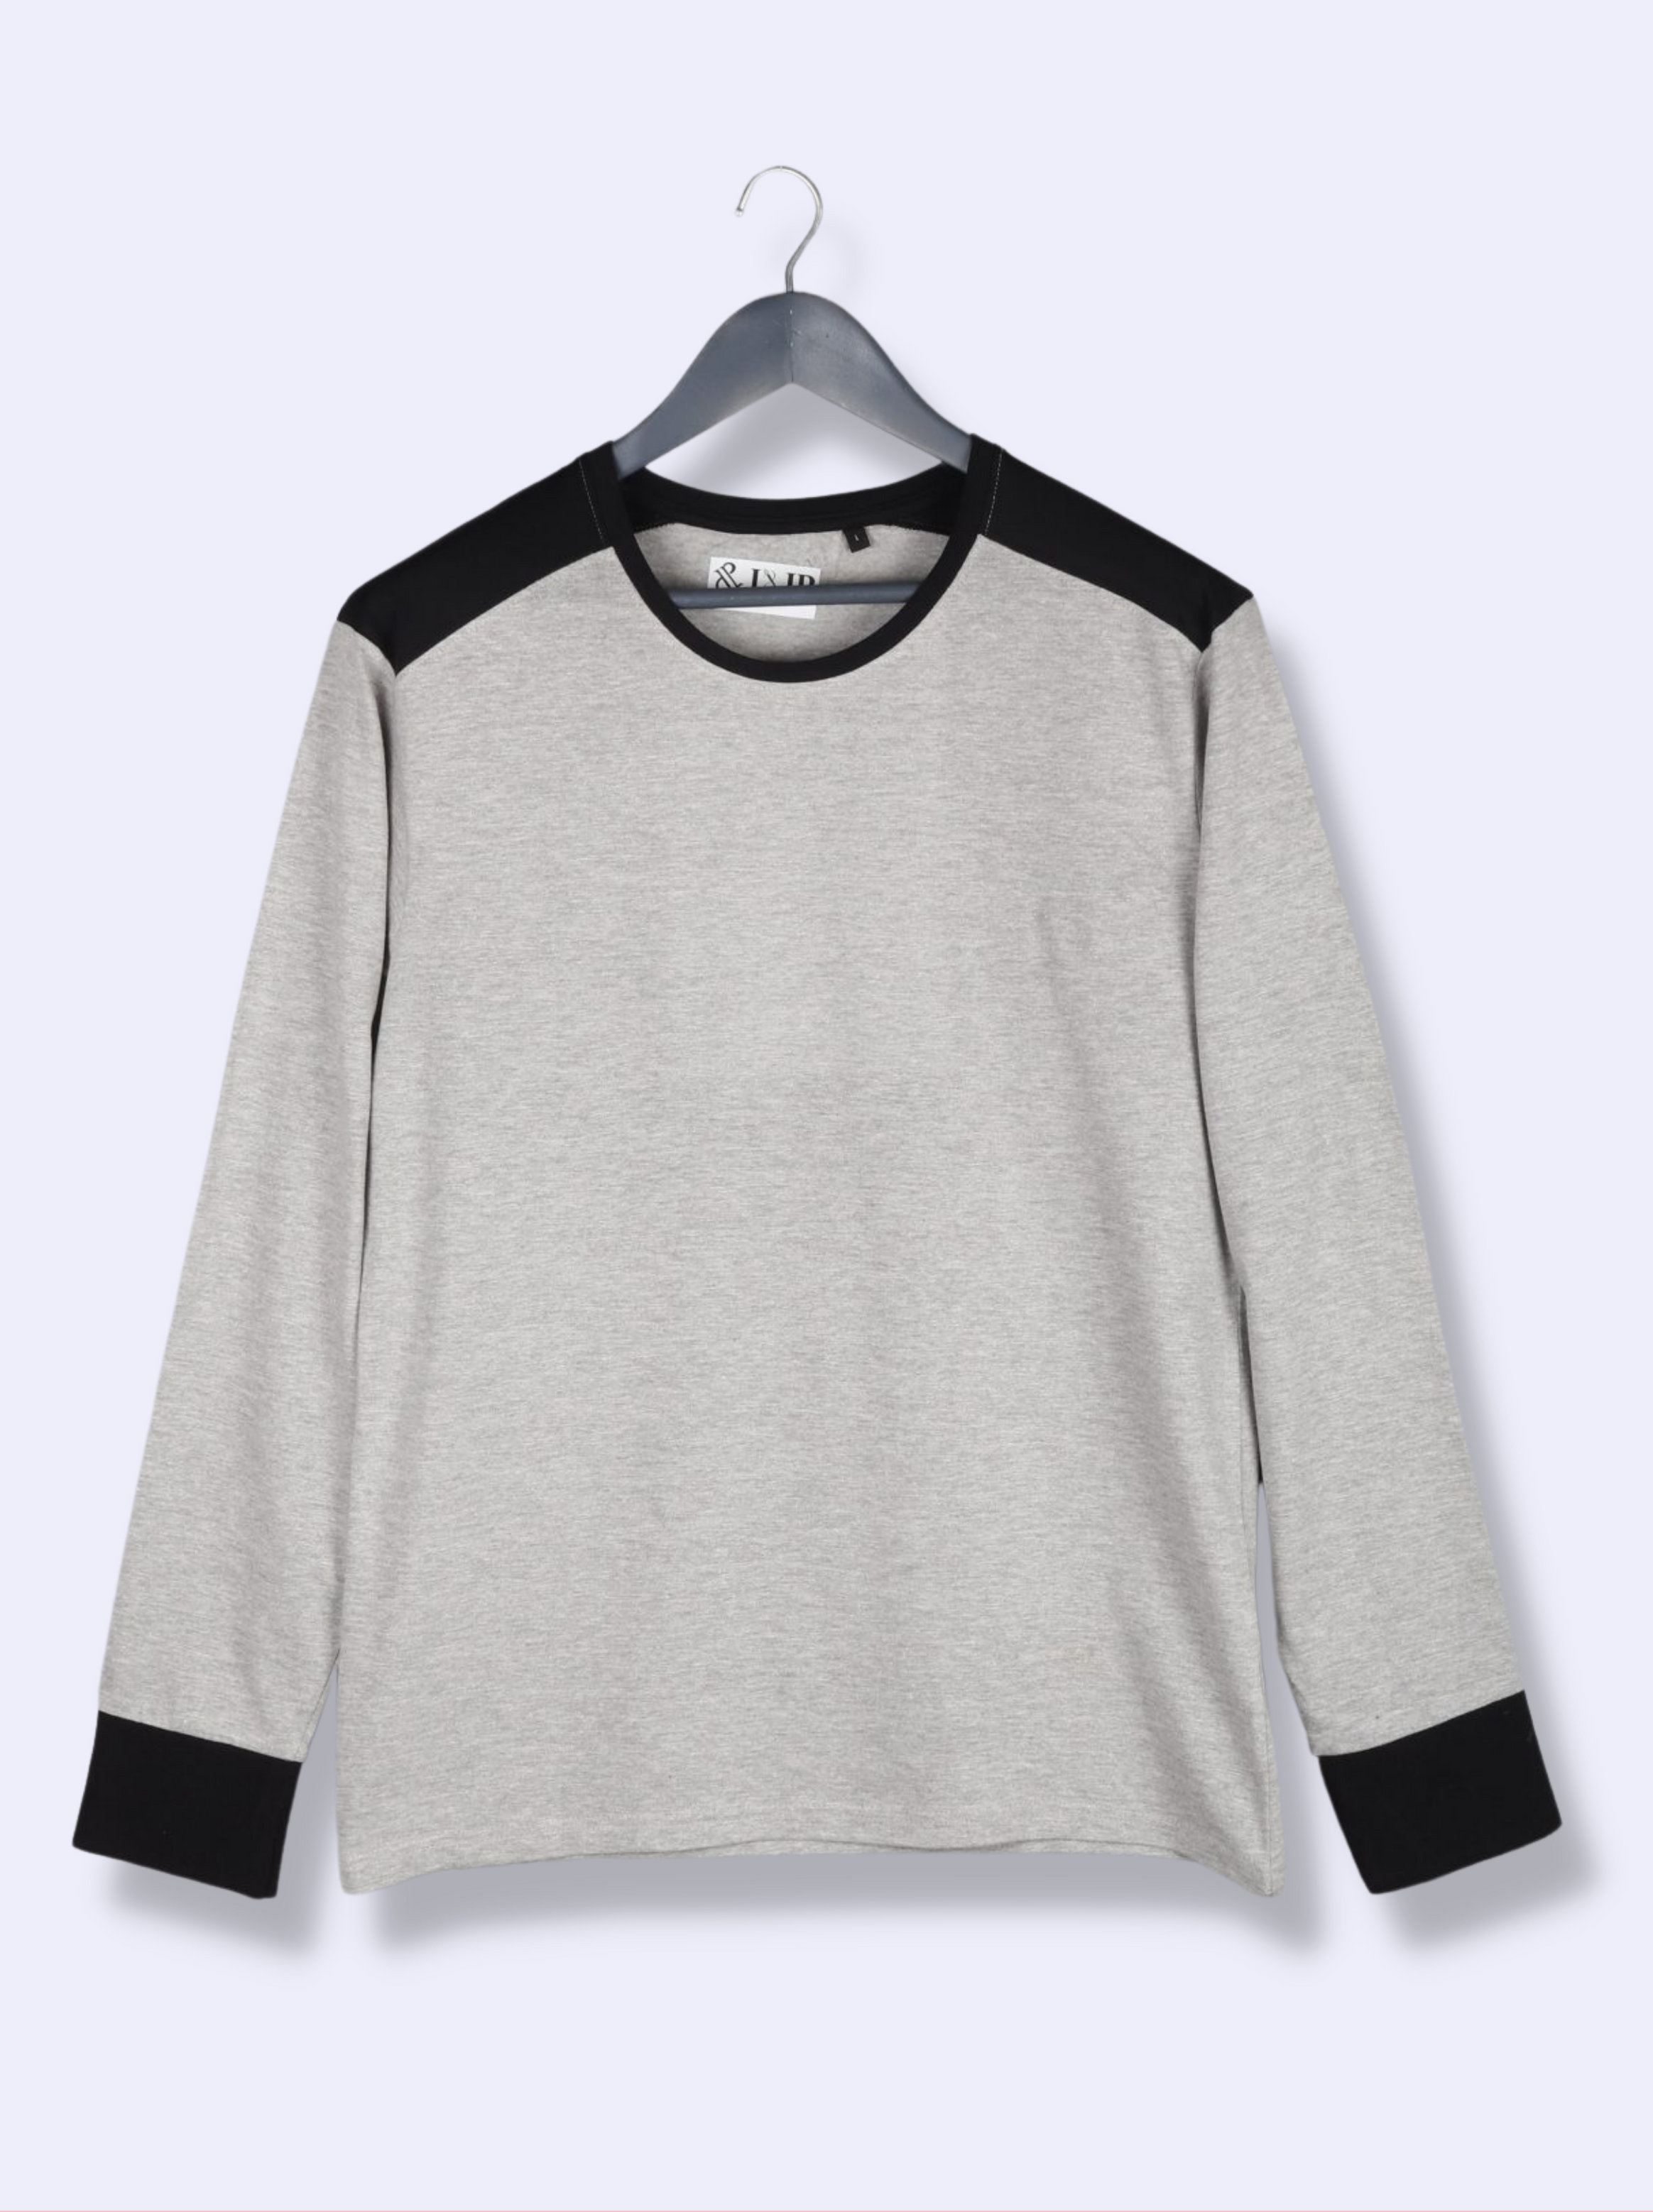 Mens Grey Full sleeve Solid Cotton jersey knit T-shirt